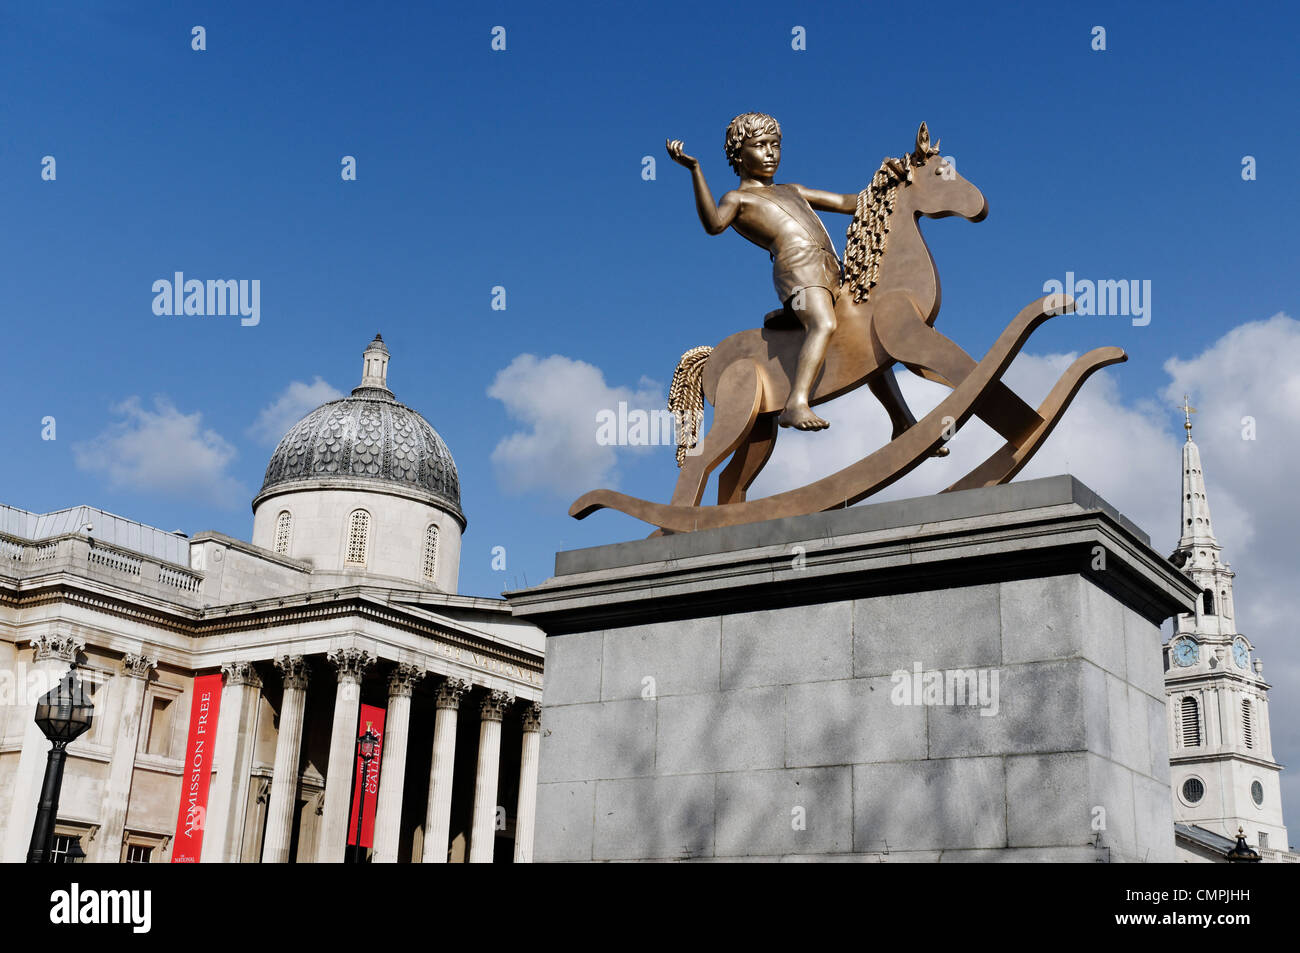 Powerless Structures Fig 101, the 2012 statue on Trafalgar Square's Fourth Plinth Stock Photo